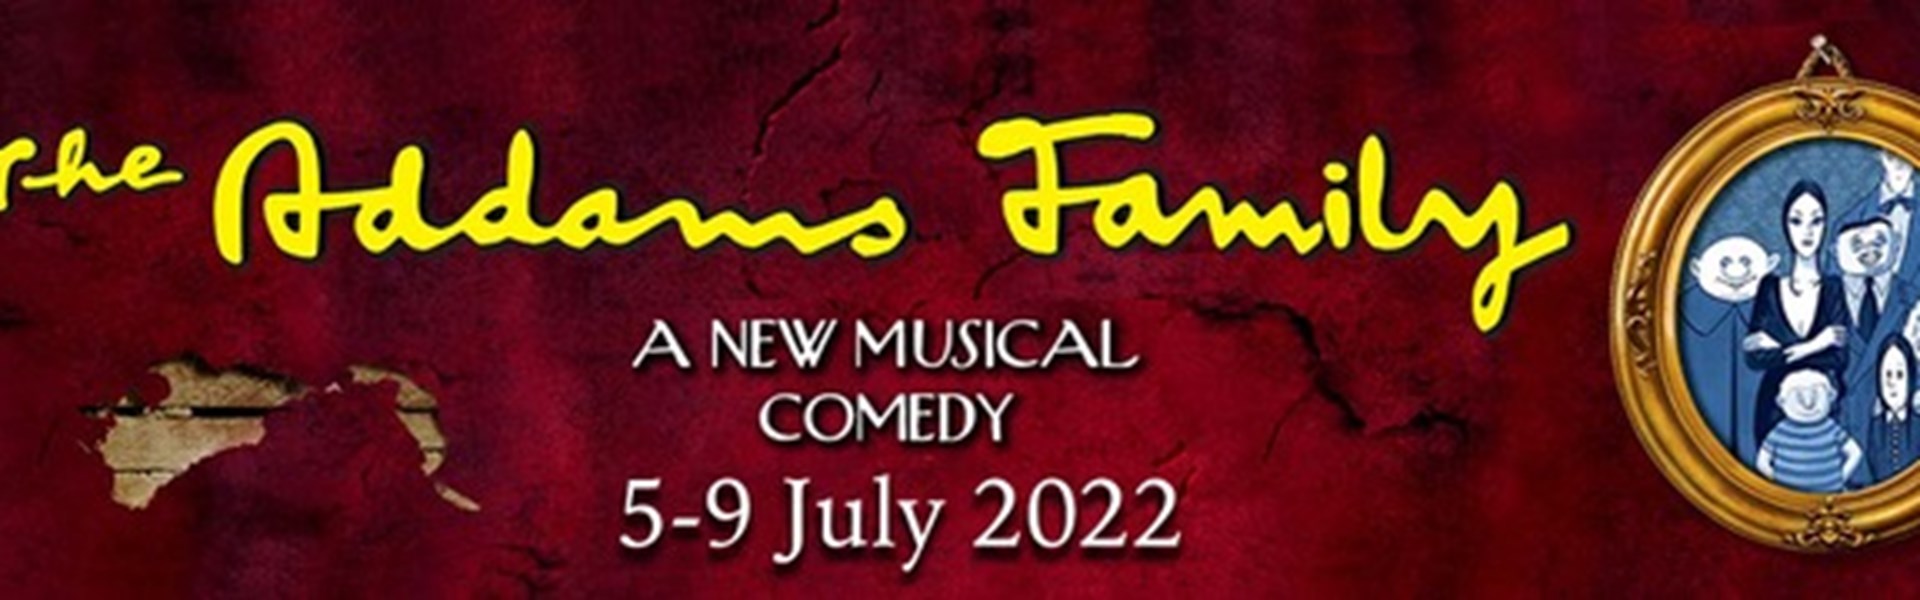 The Addams Family (presented by Sutton Coldfield Musical Theatre Company)